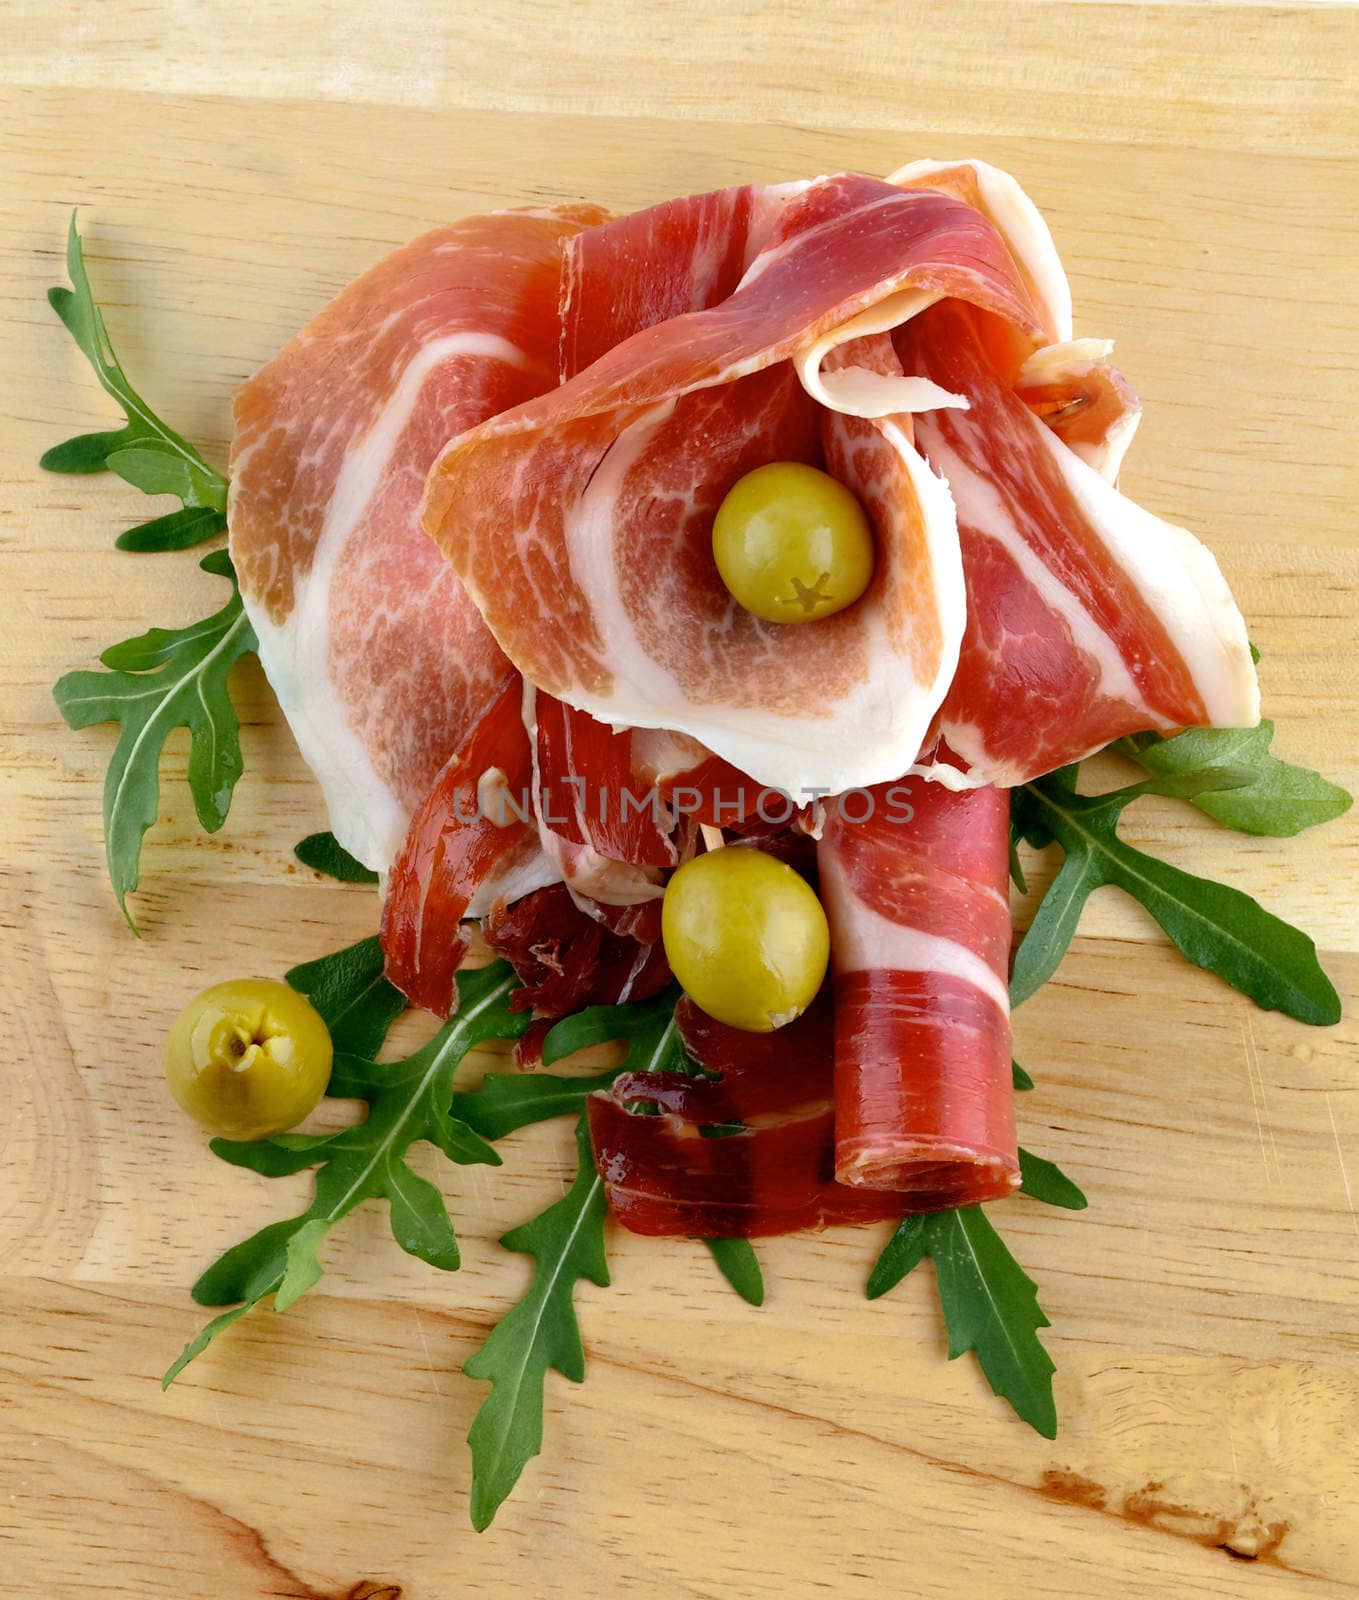 Jamon Appetizer with Green Olives and Arugula Leafs closeup on Wooden Cutting Board